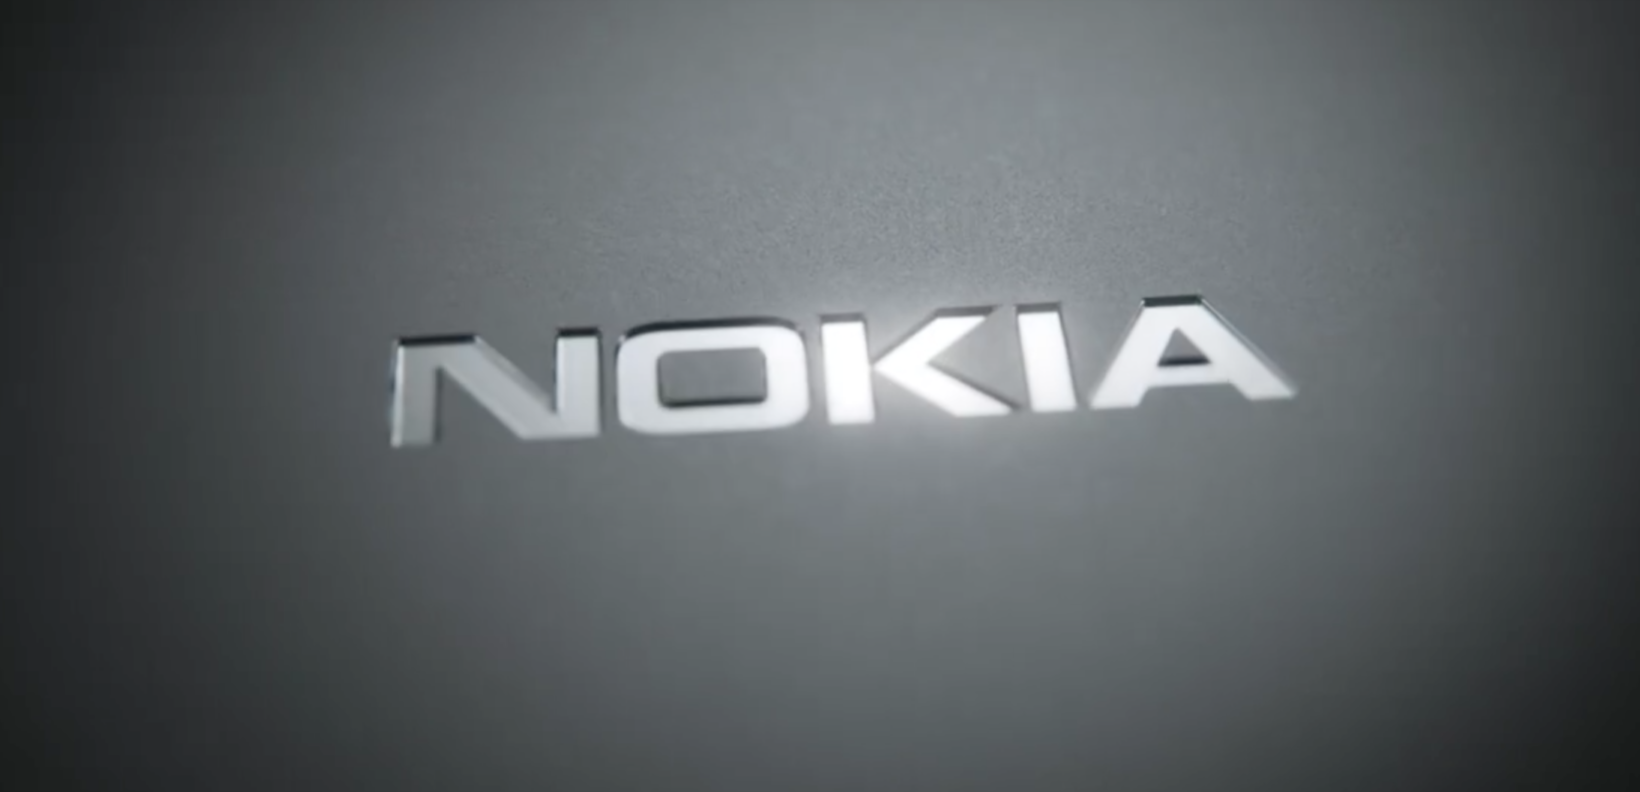 Nokia teases yet another Android phone in a cryptic Facebook post